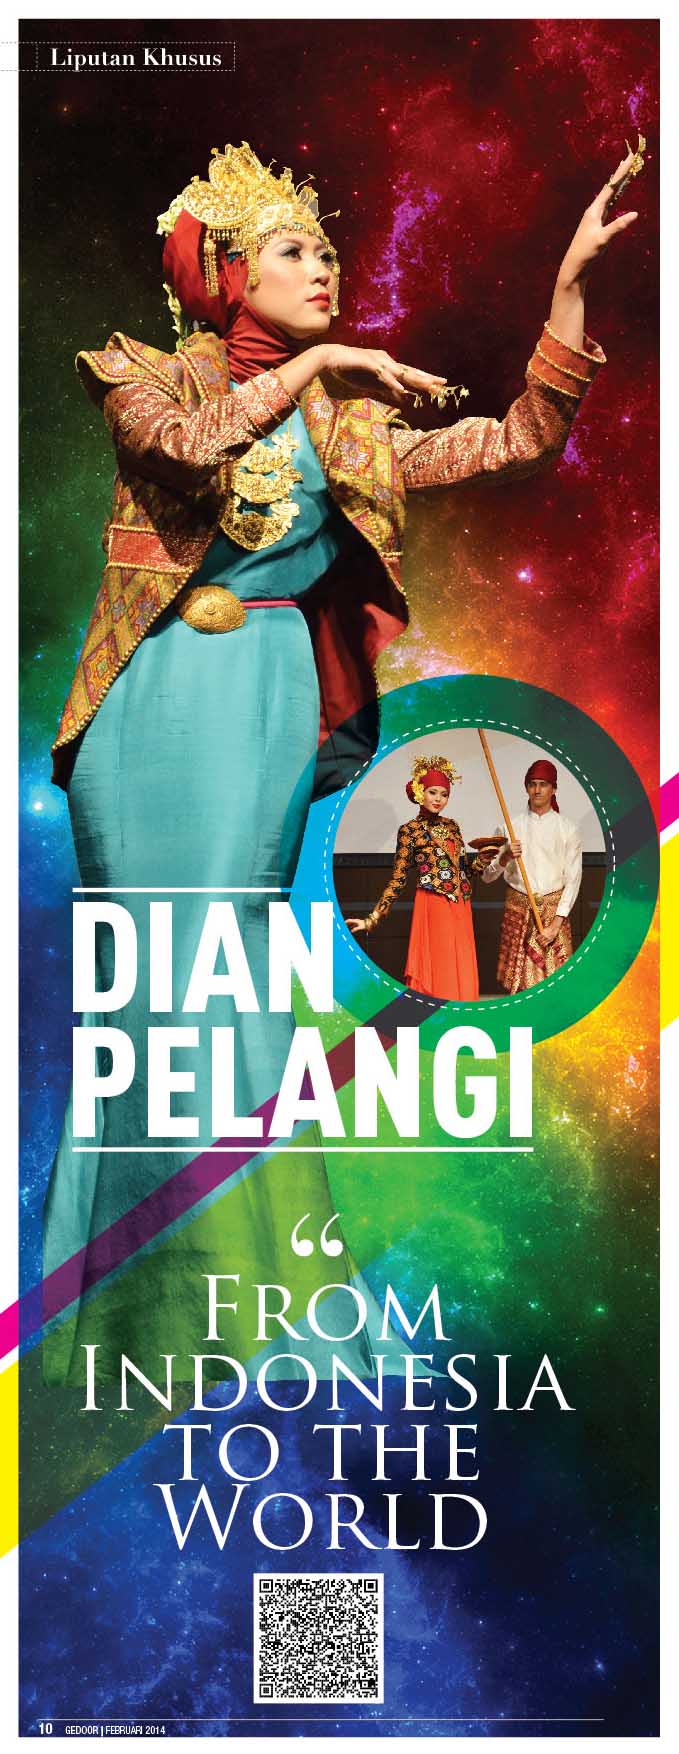 Dian Pelangi From Indonesia To The World